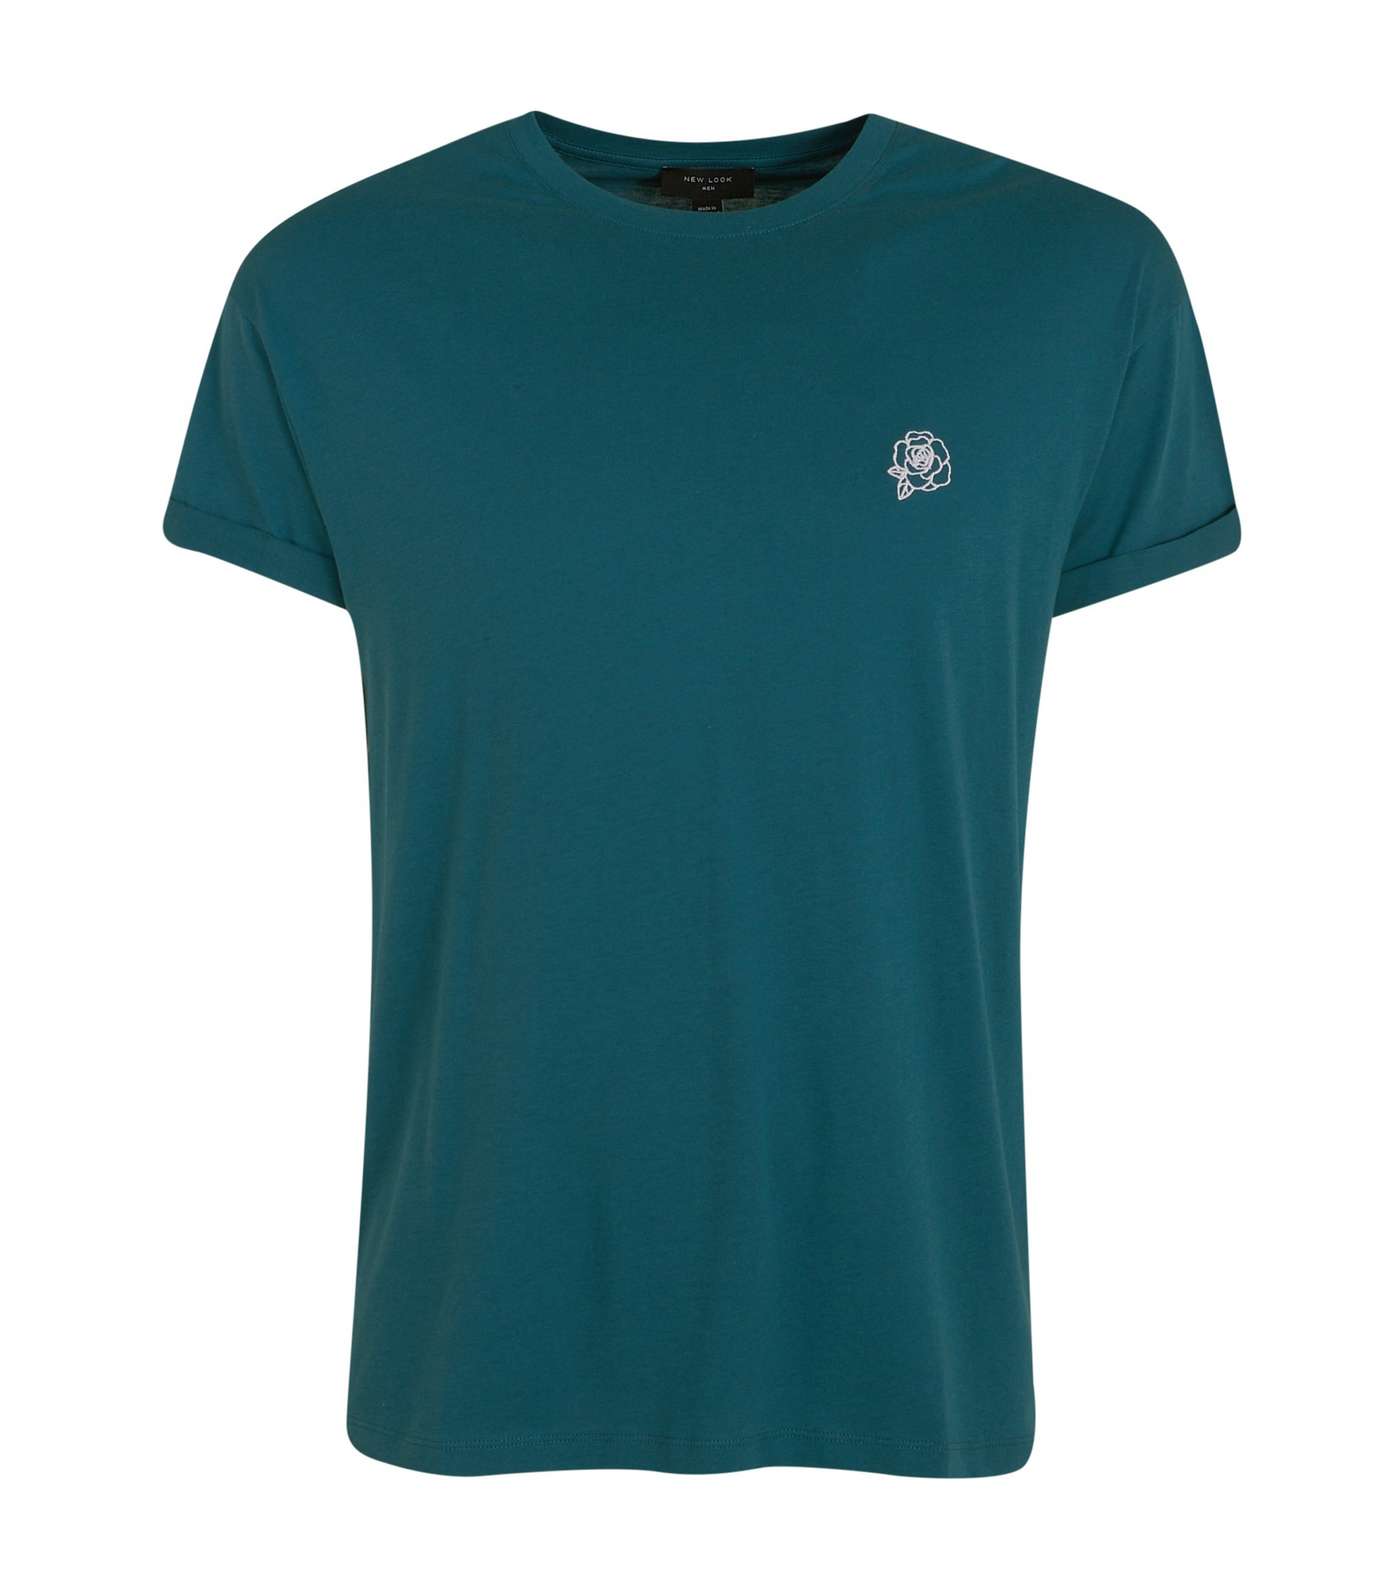 Teal Rose Embroidered Short Sleeve T-Shirt